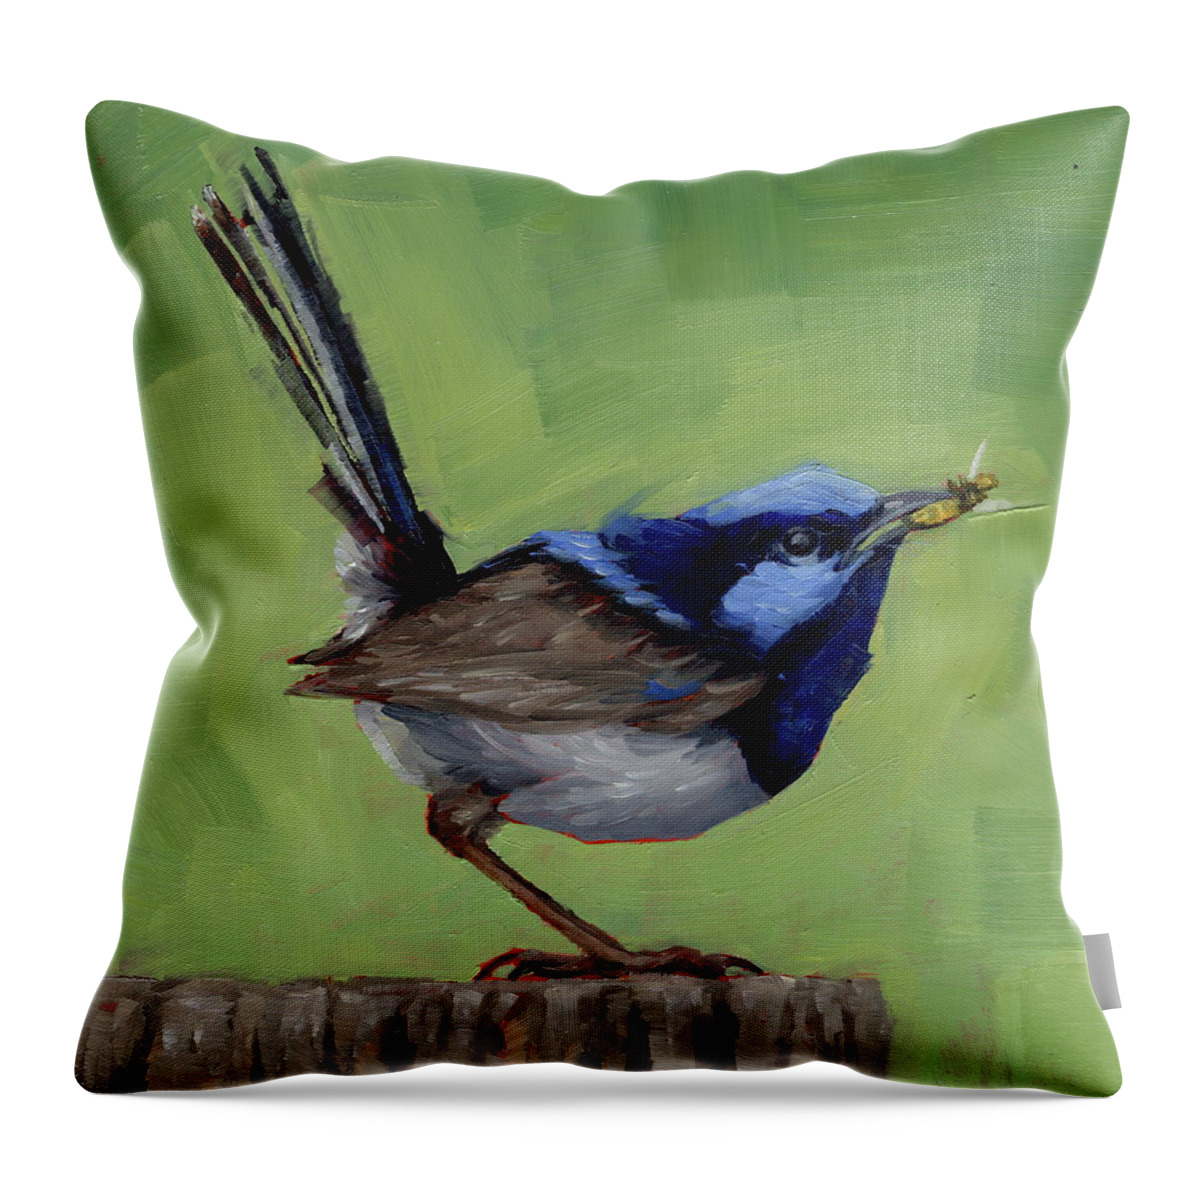 Wren Throw Pillow featuring the painting Fairy Wren With Lunch by Margaret Stockdale